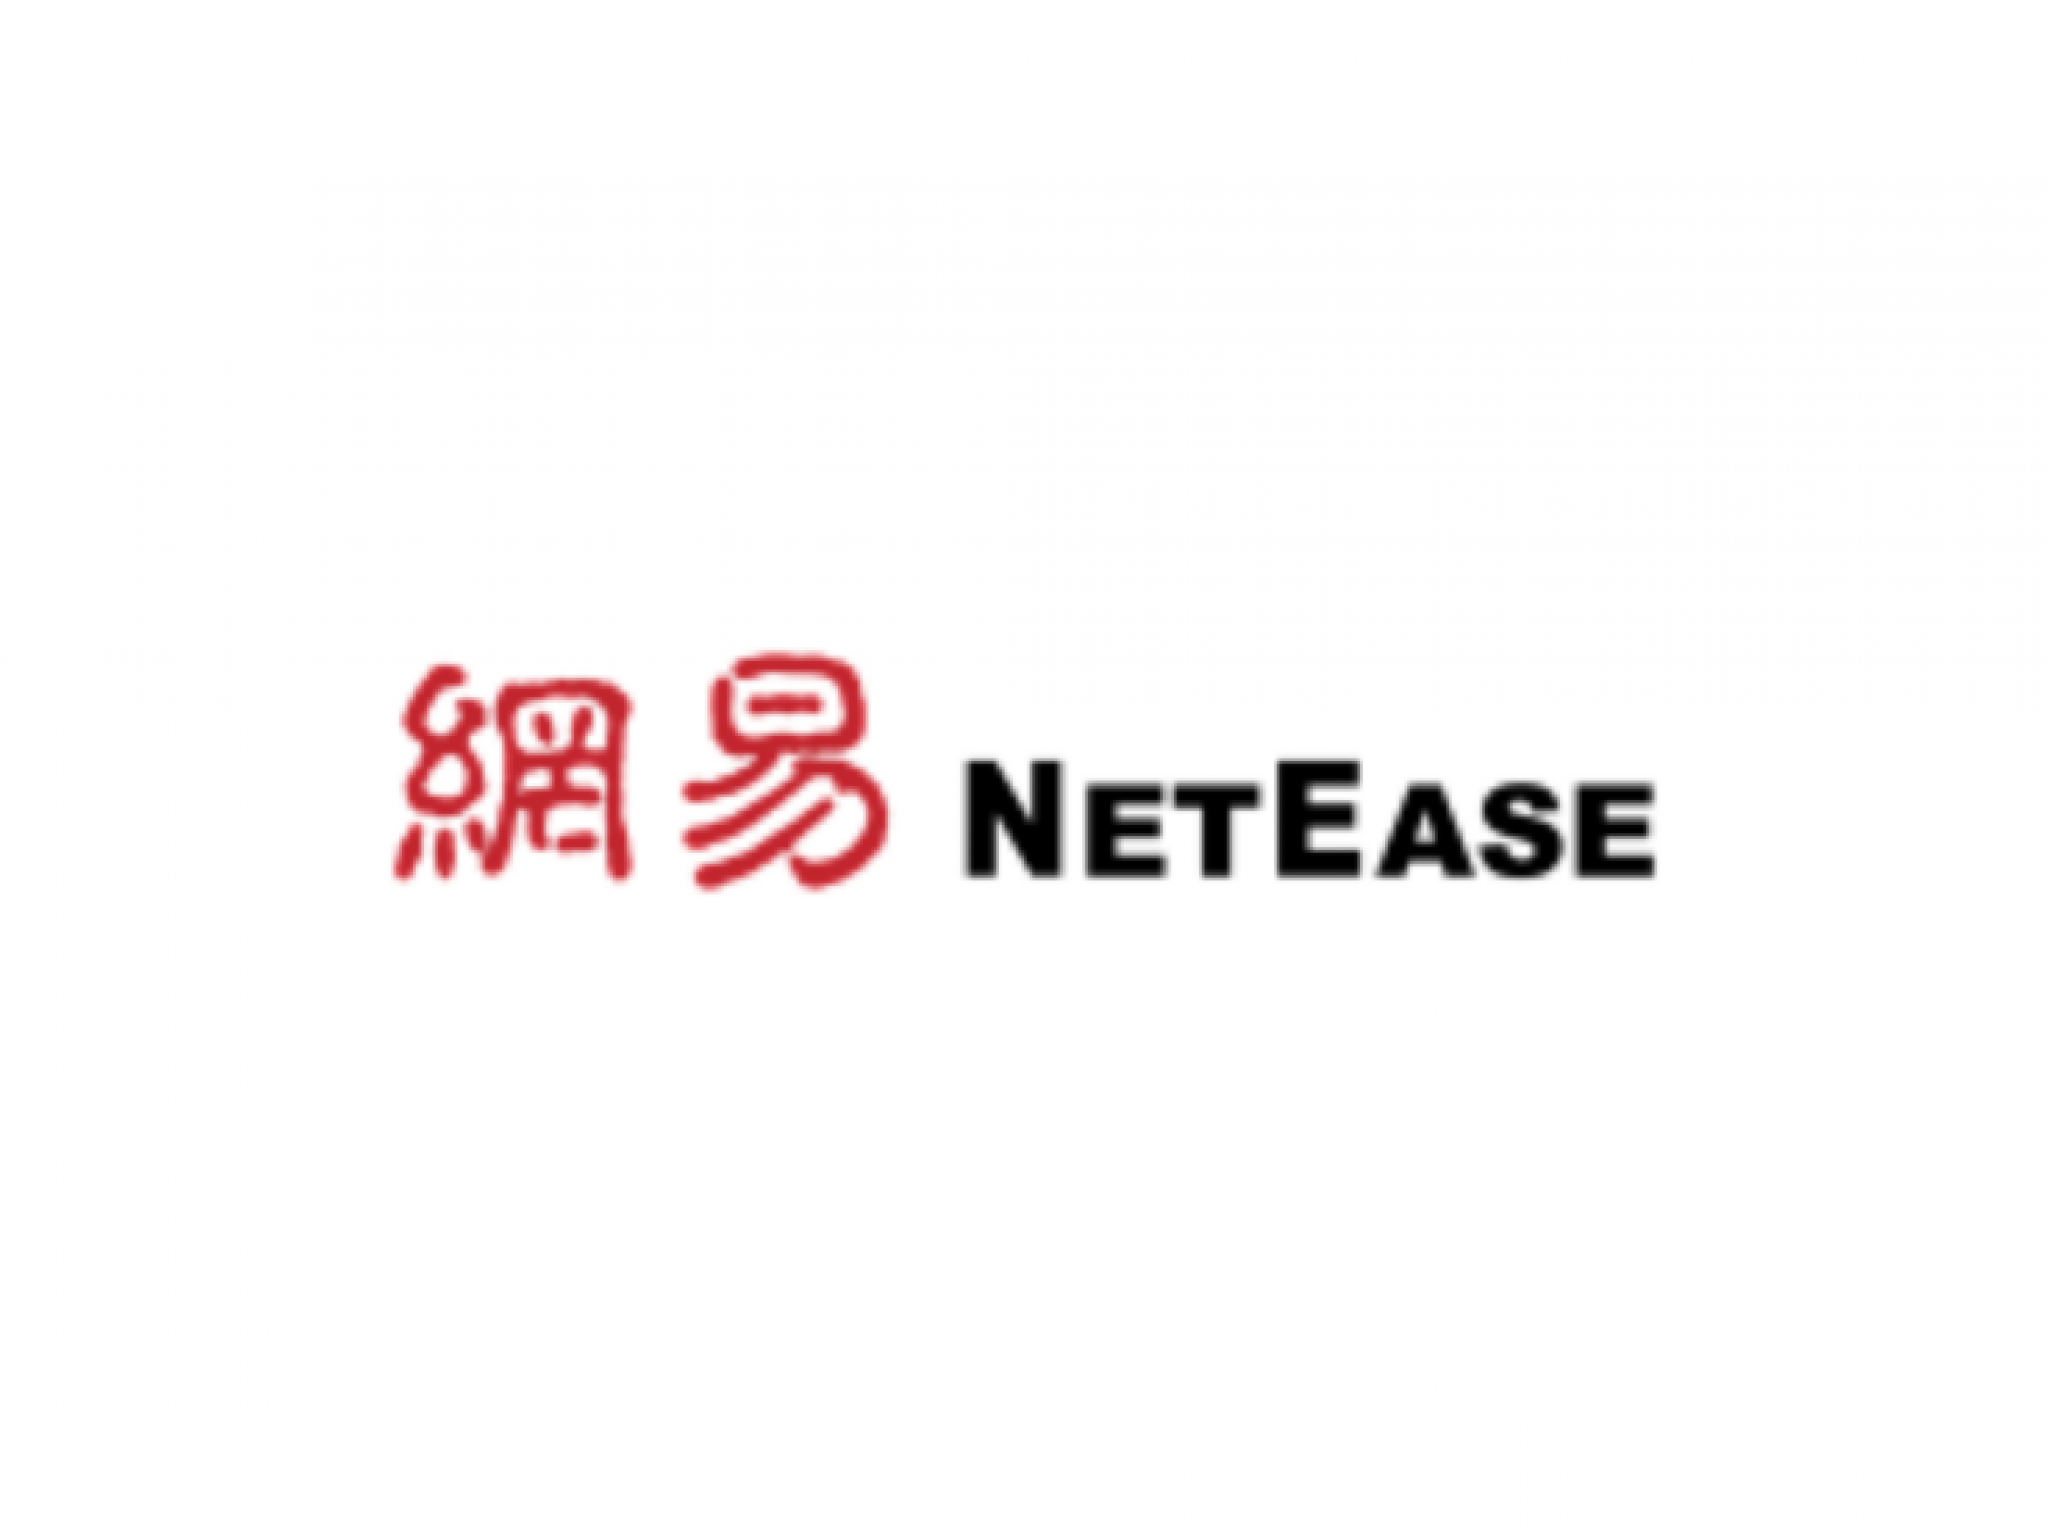  neteases-q1-earnings-gaming-giant-shows-resilience-with-growth-in-cash-flow-and-cloud-music 